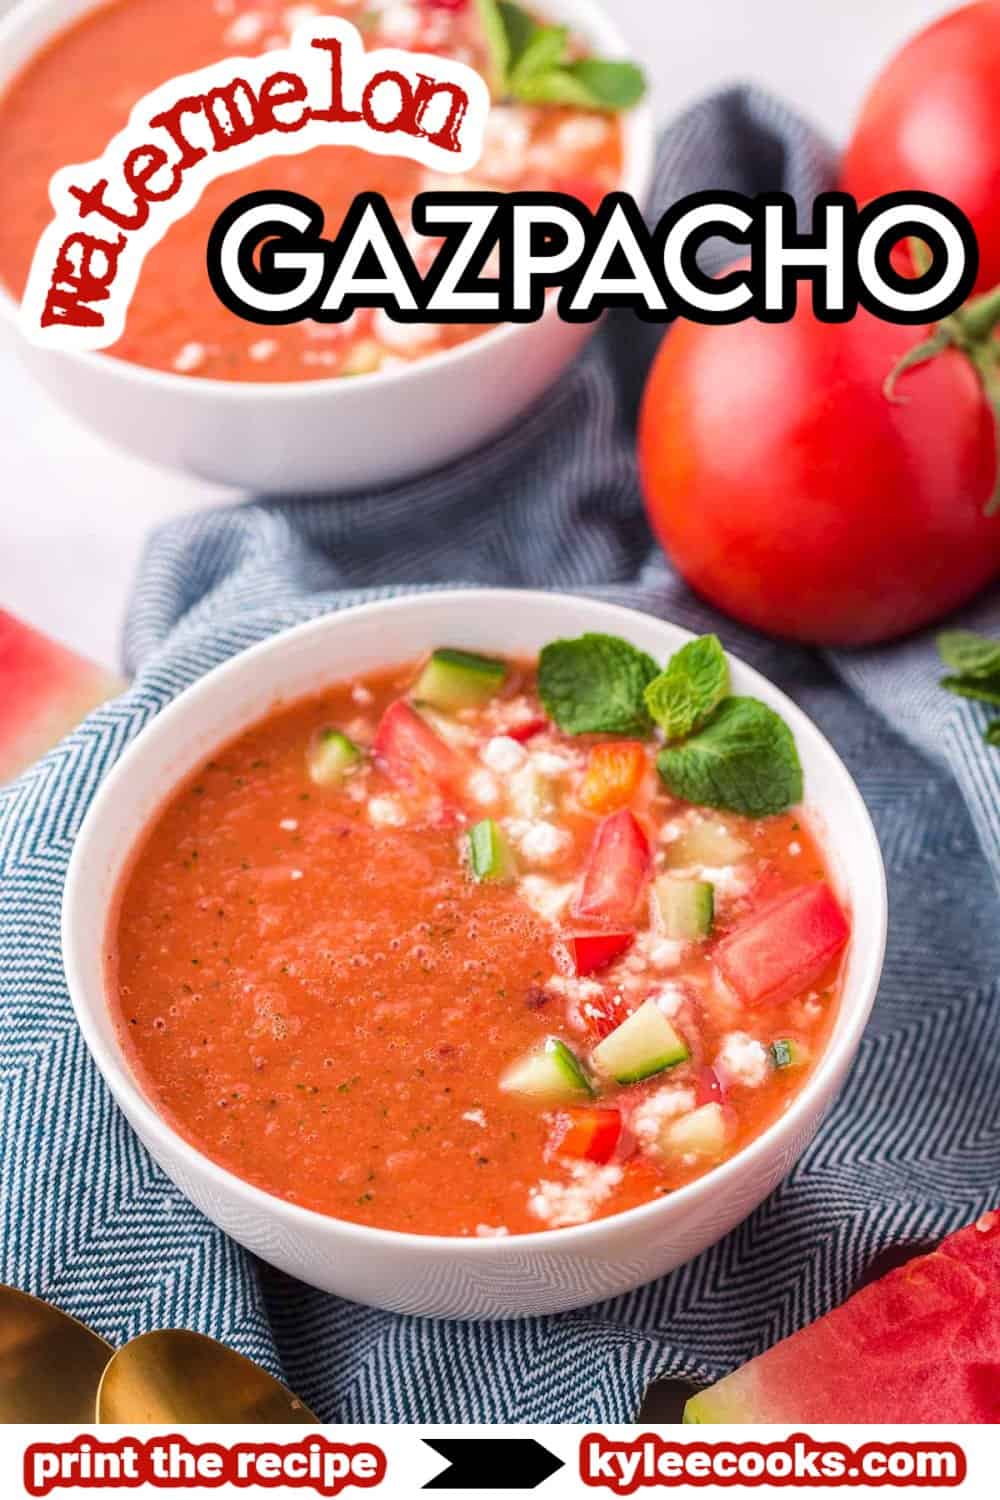 watermelon gazpacho with recipe name overlaid in text.